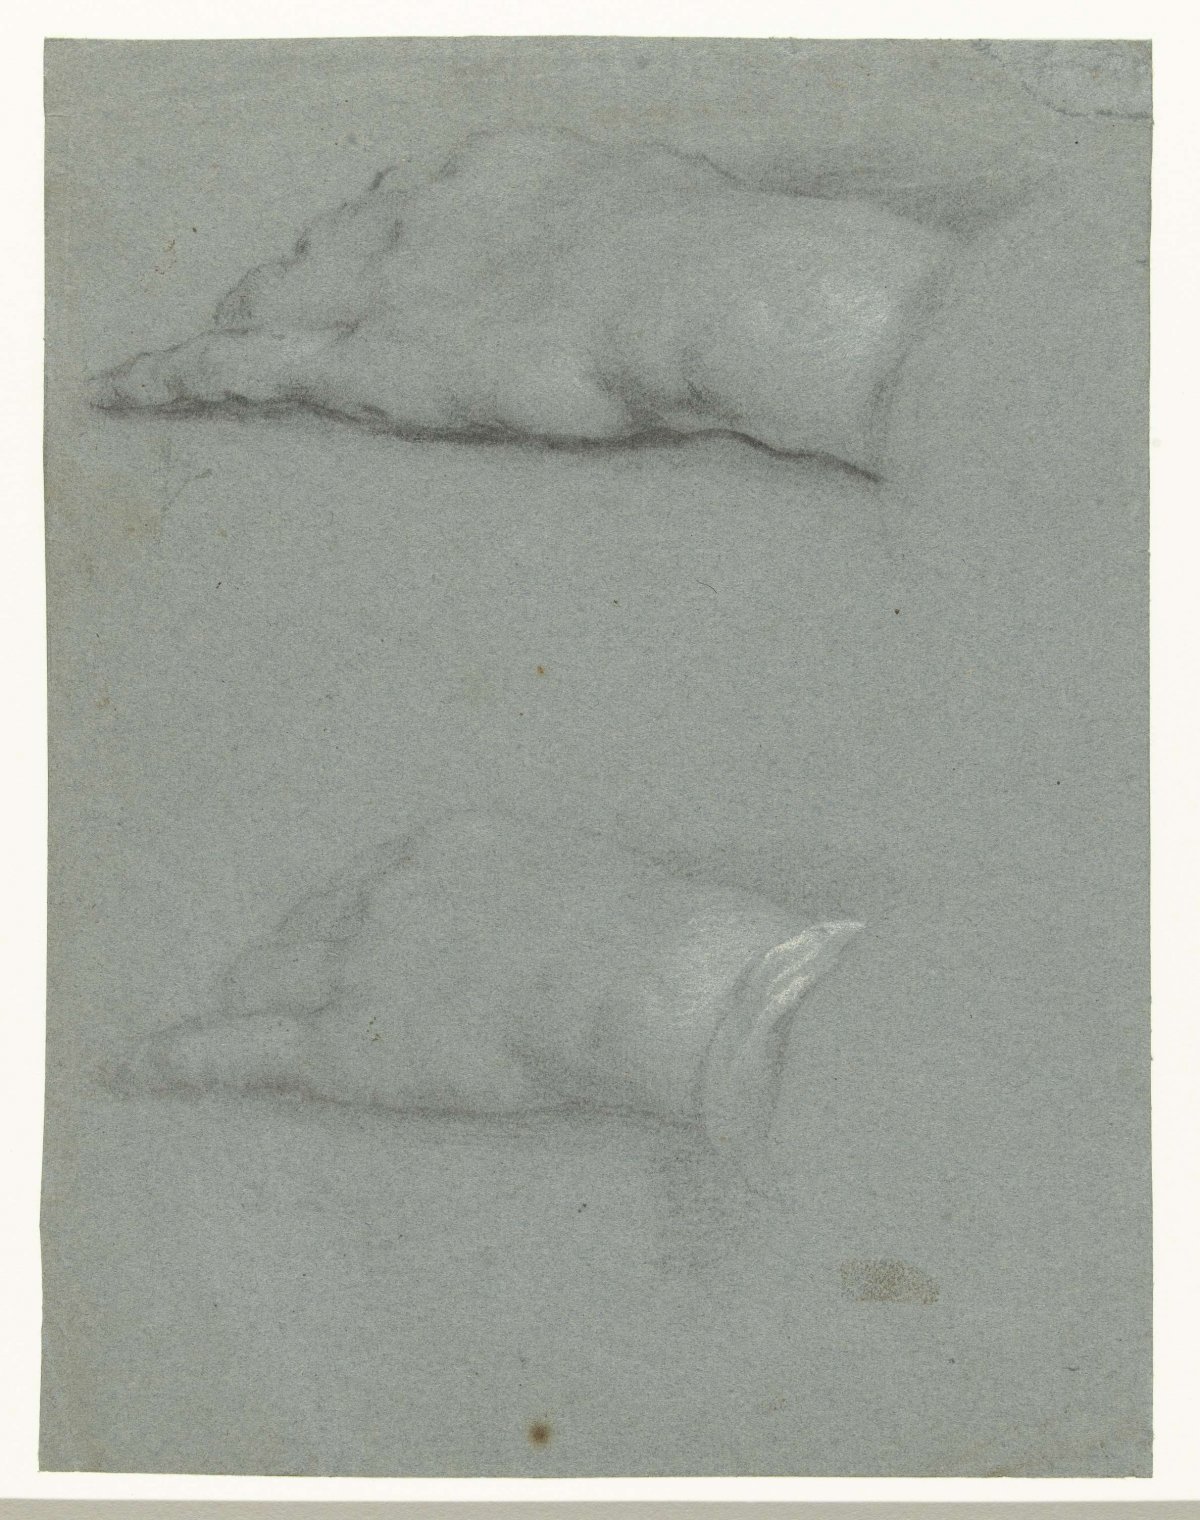 Two studies of a left hand, Anthony van Dyck, 1610 - 1641